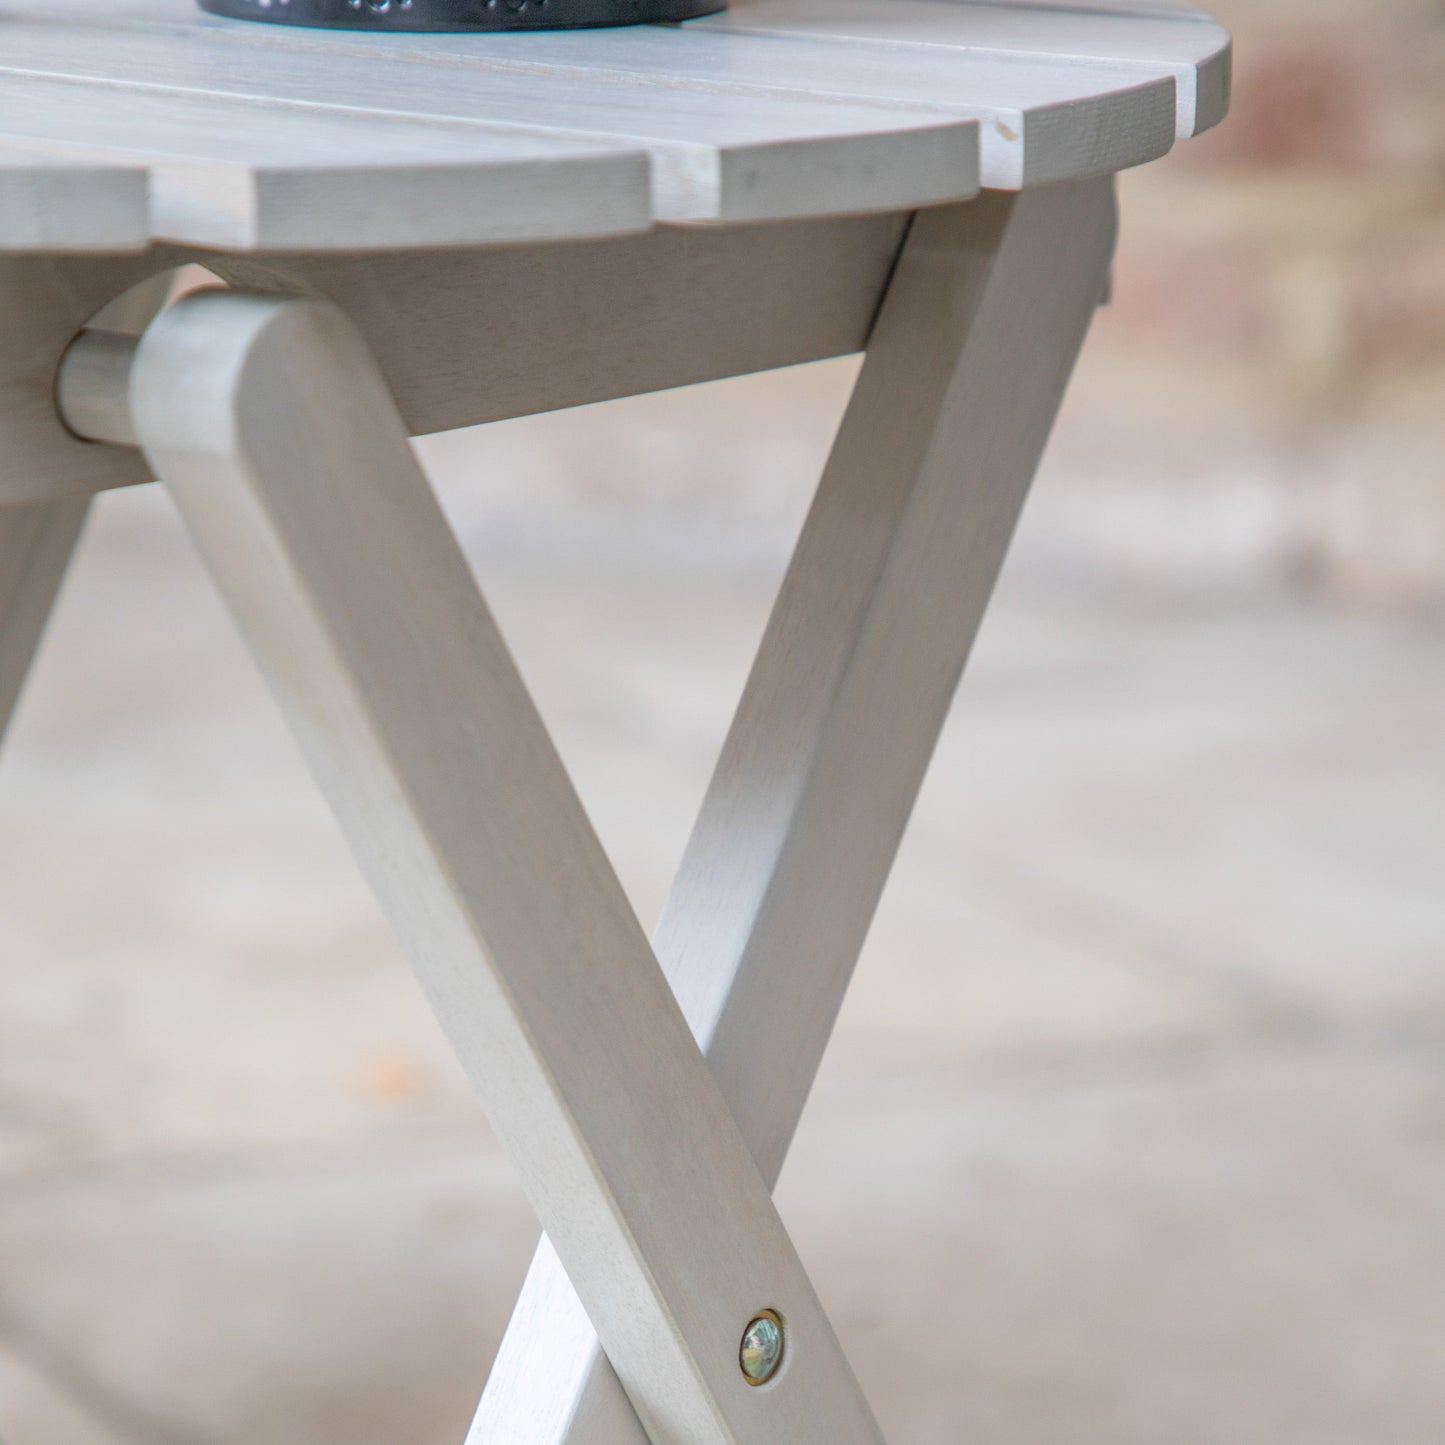 A Whitewash Side Table from Kikiathome.co.uk adorned with a vase, perfect for home furniture and interior decor.